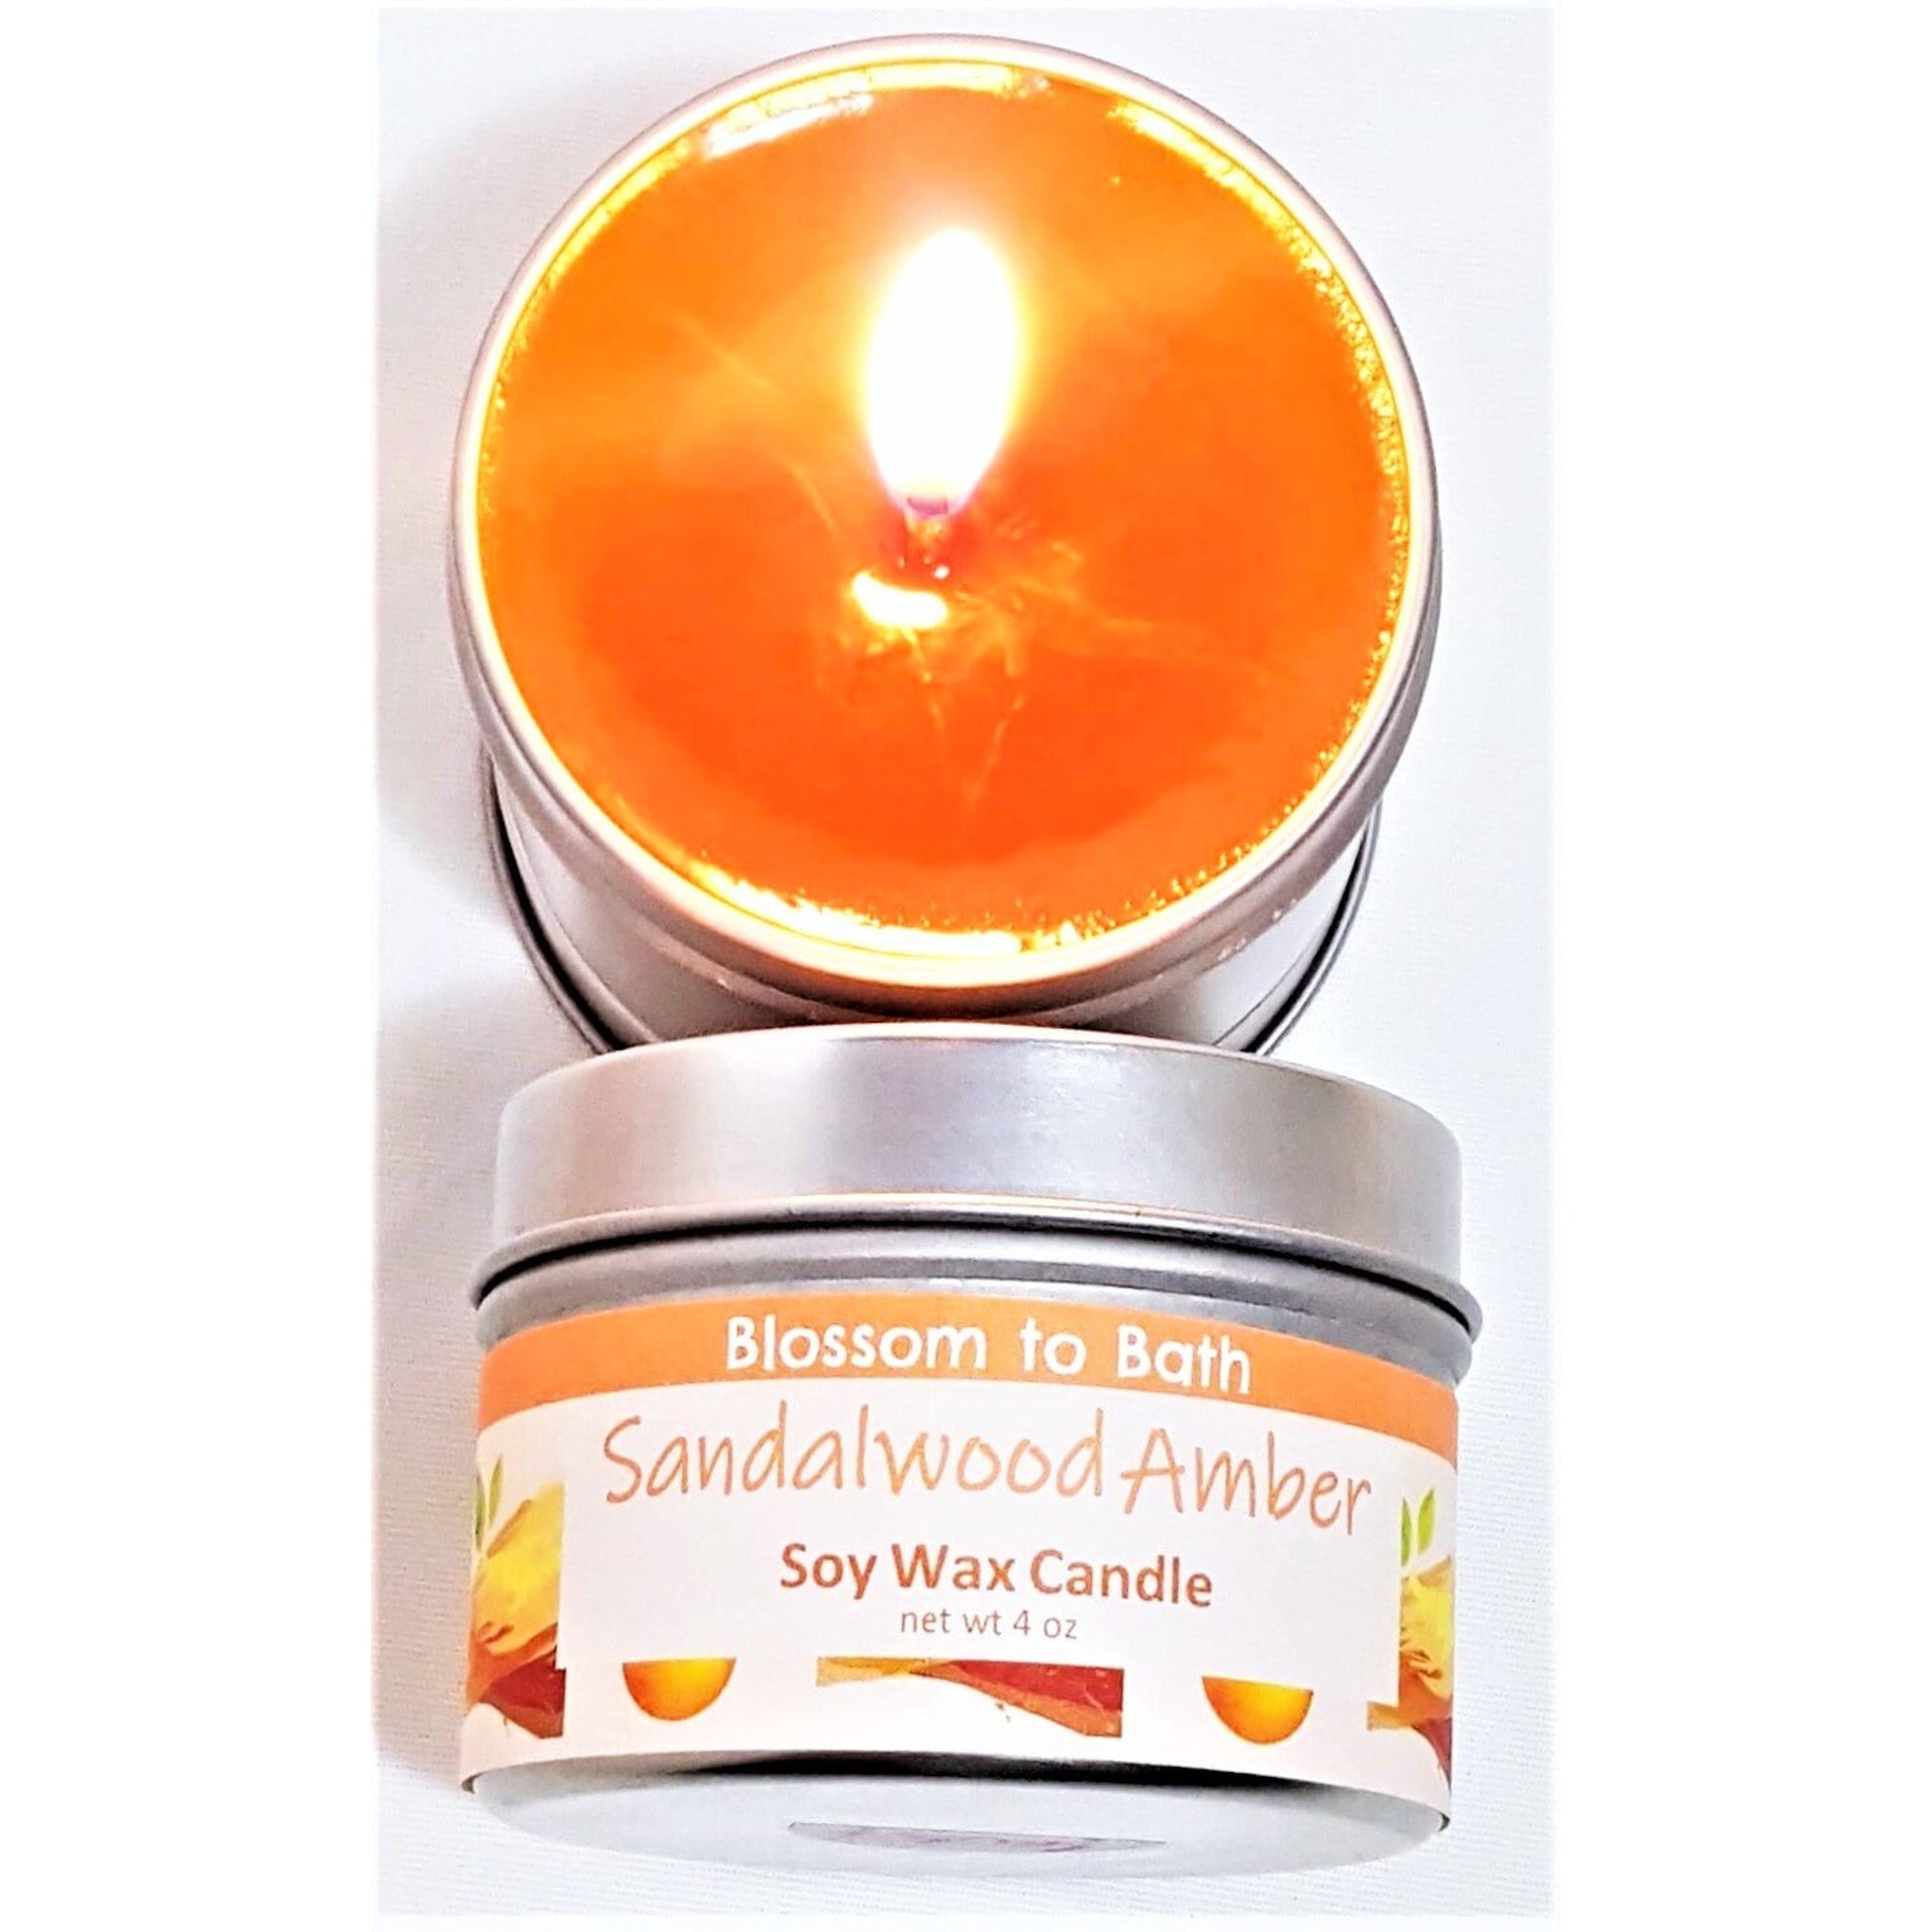 Buy Blossom to Bath Sandalwood Amber Soy Wax Candle from Flowersong Soap Studio.  Fill the air with a charming fragrance that lasts for hours  An irresistible combination of warm sandalwood and spice.